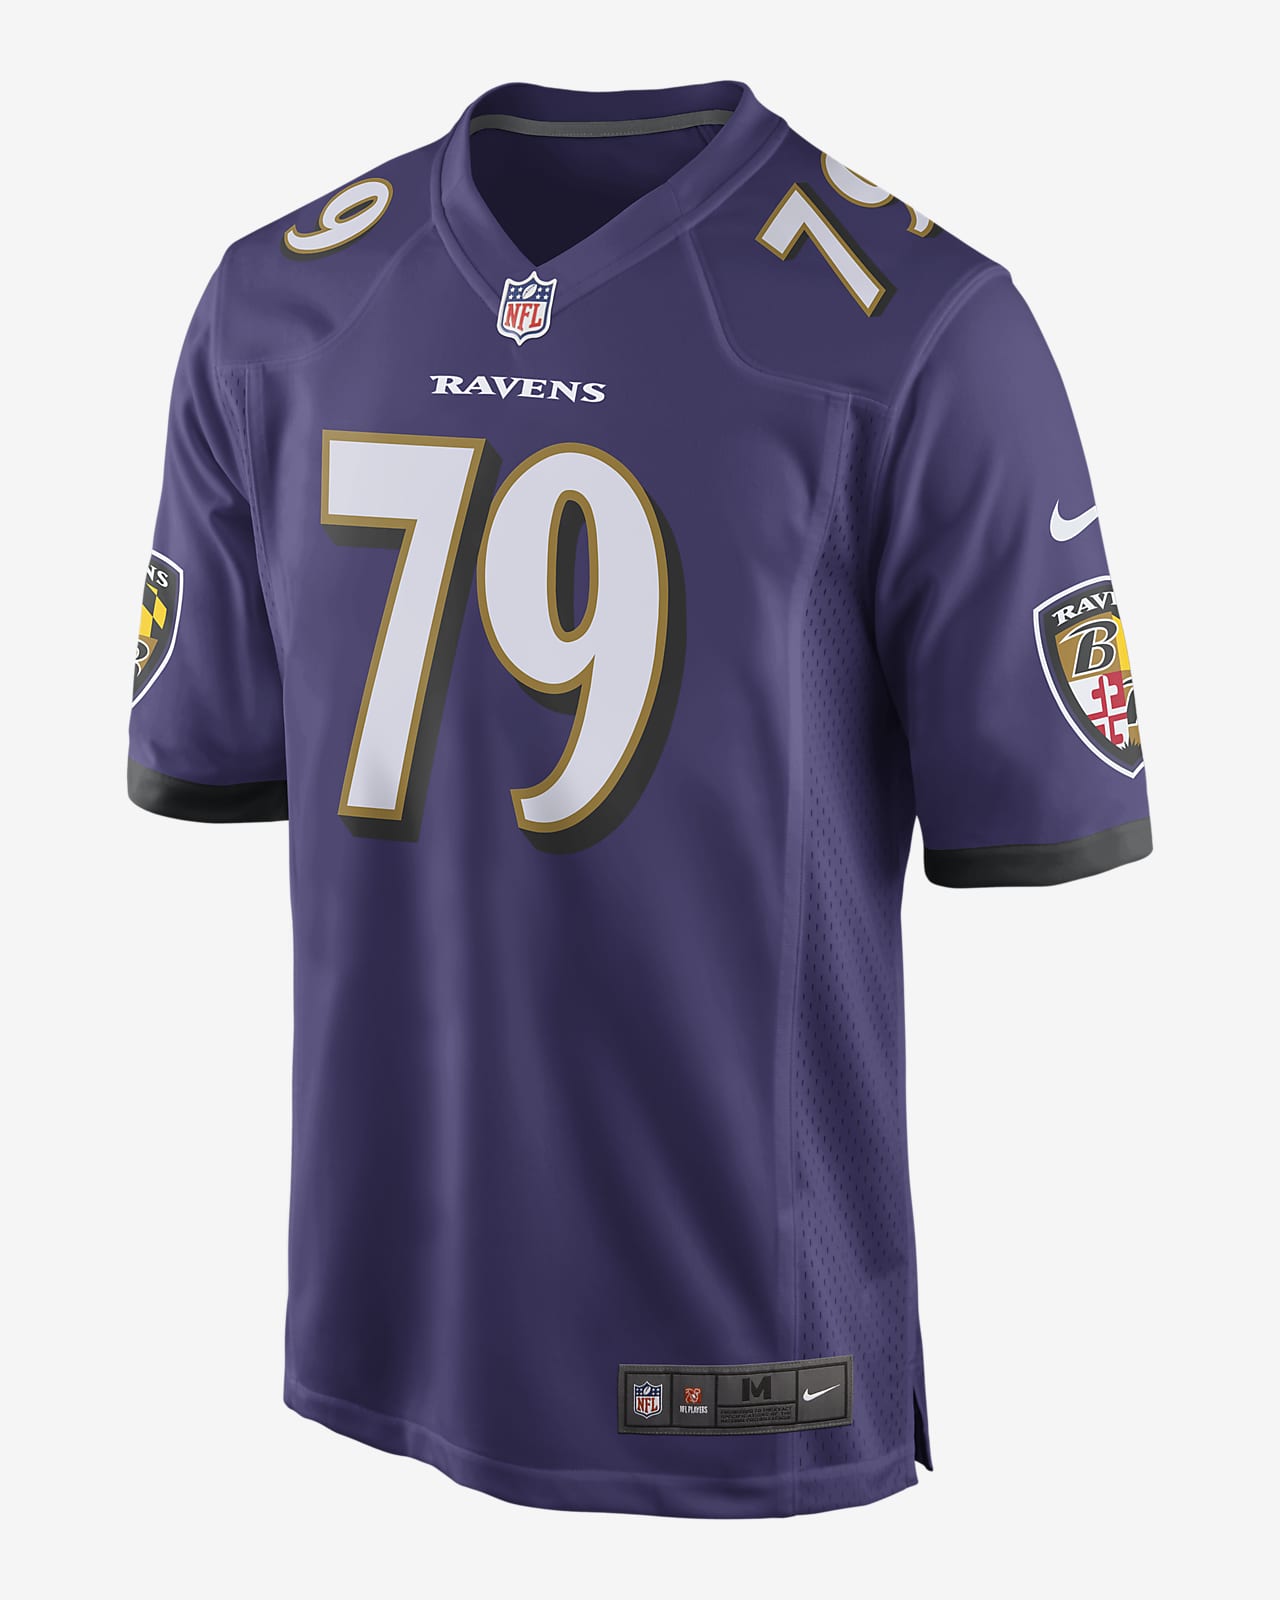 NFL Baltimore Ravens (Ronnie Stanley) Men's Football Game Jersey. Nike.com